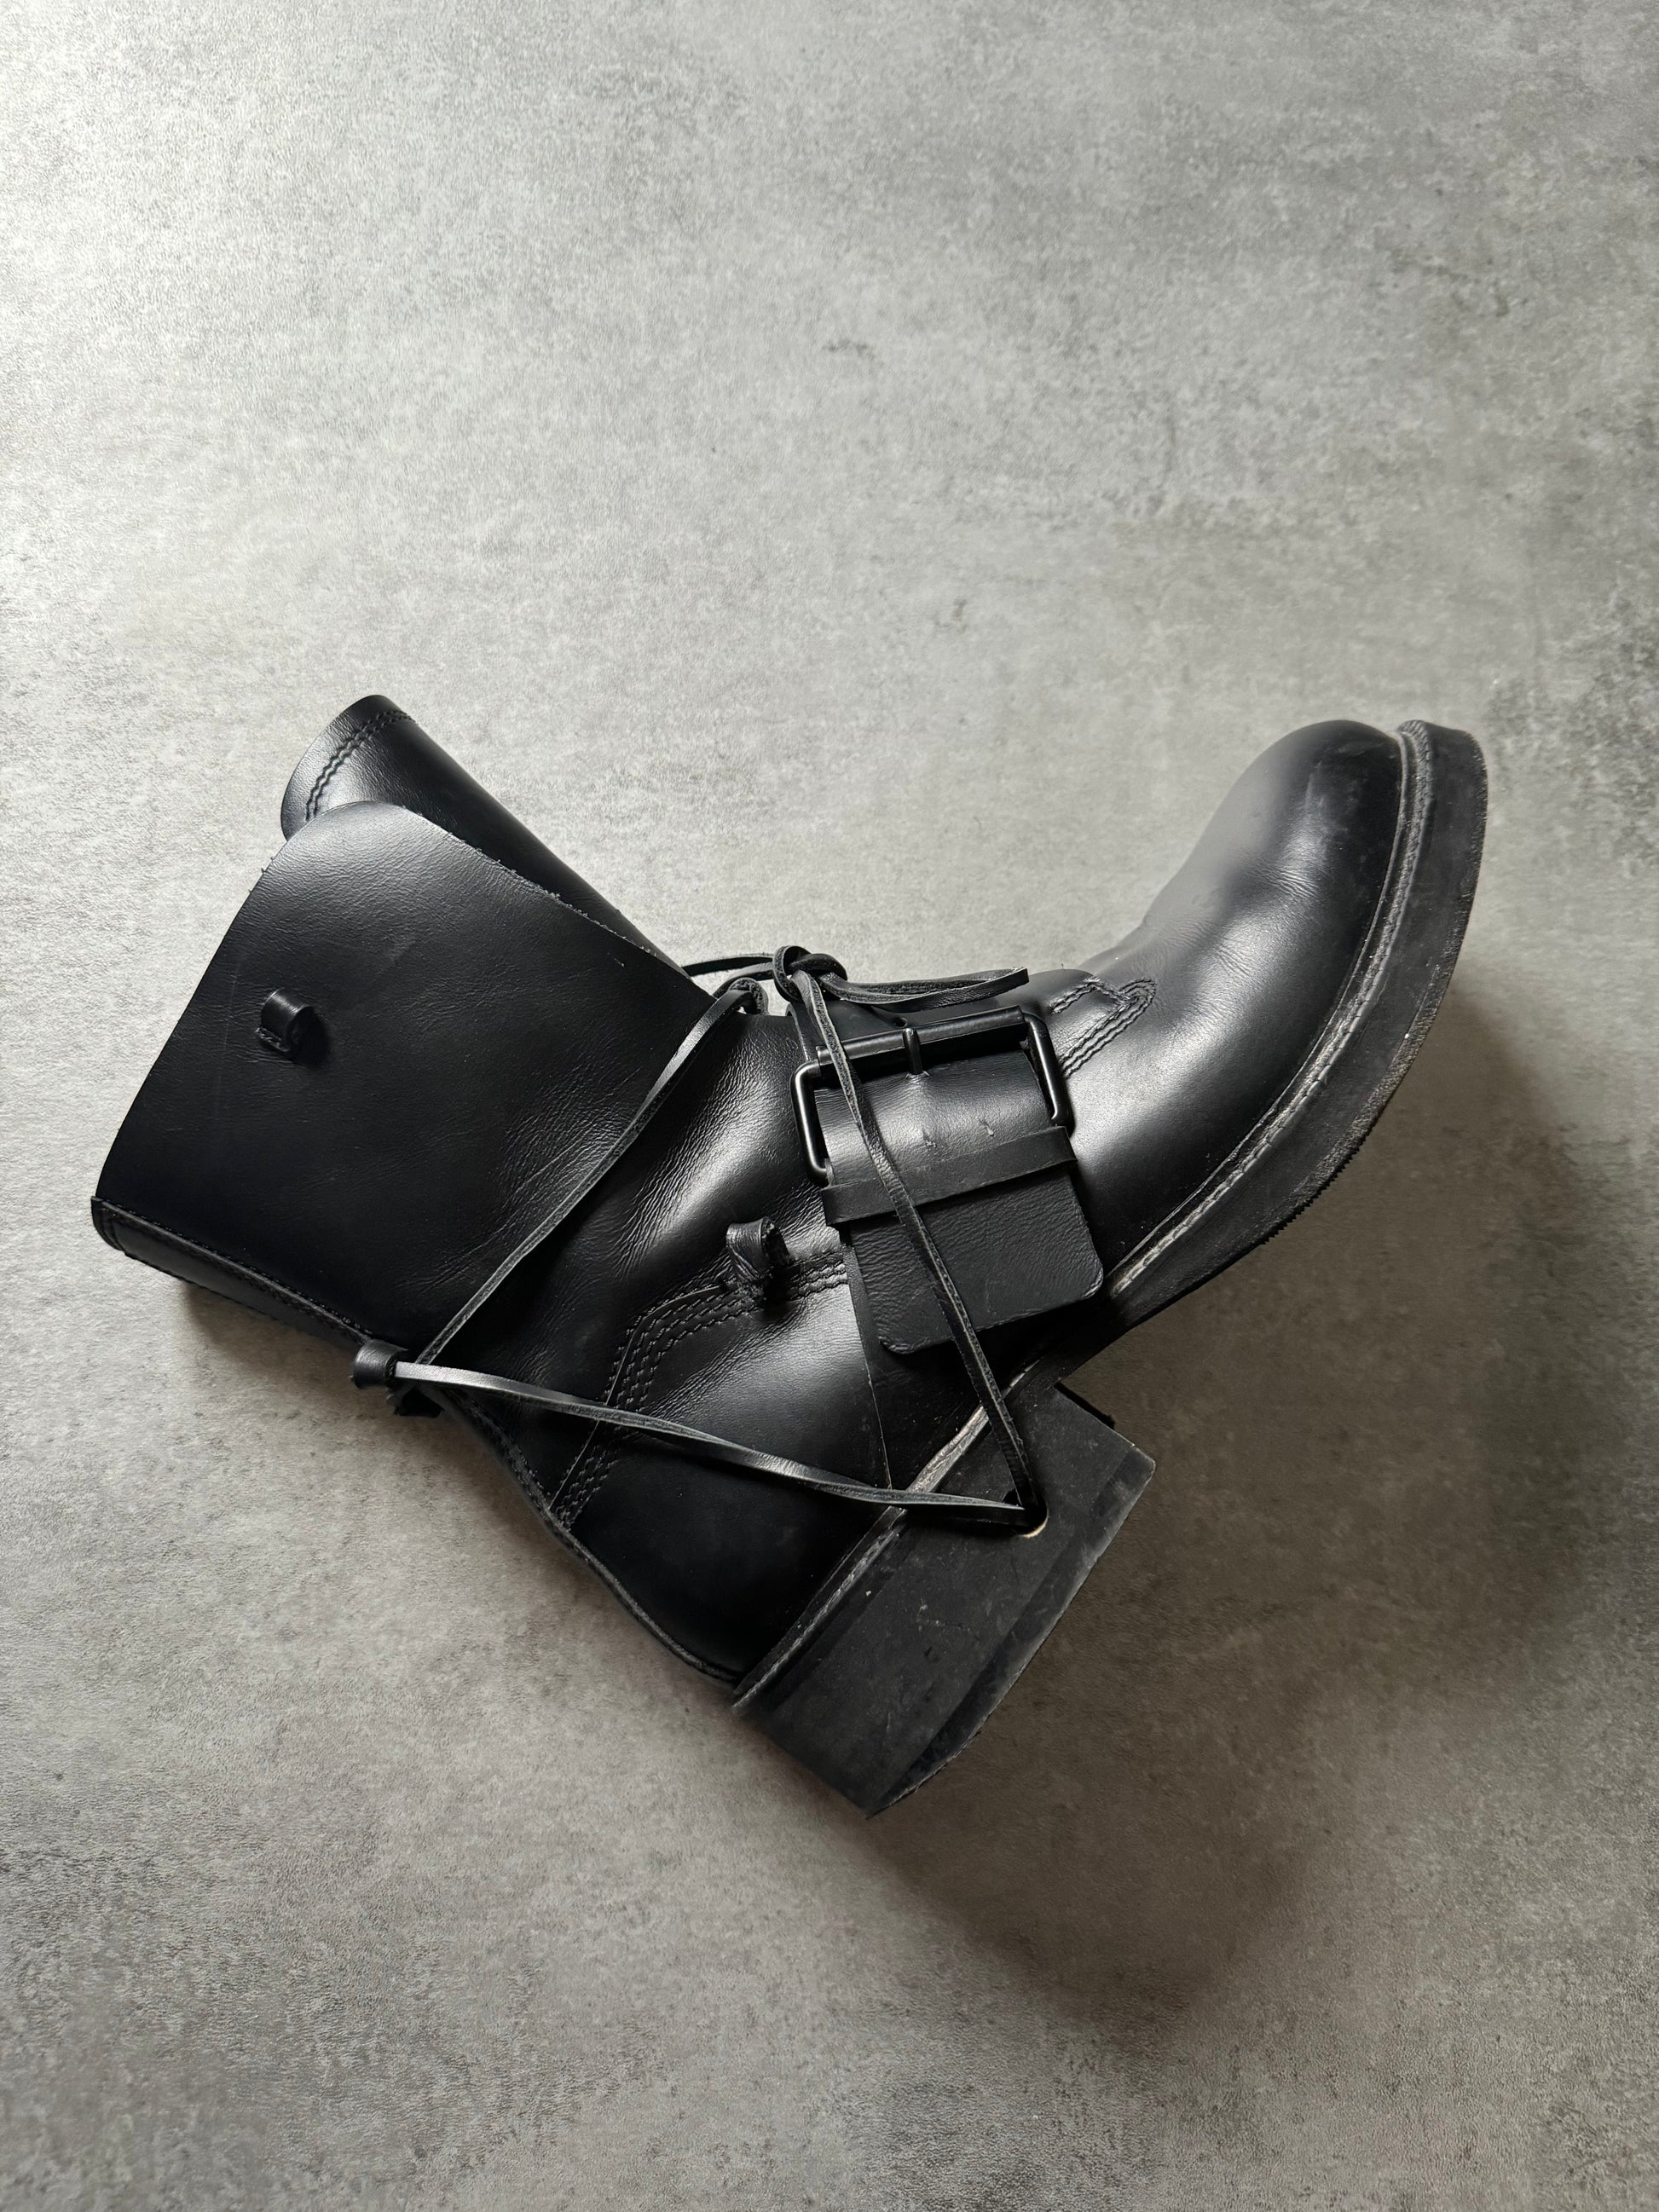 AW1998 Dirk Bikkembergs High Mountaineering Black Boots (43) - 6